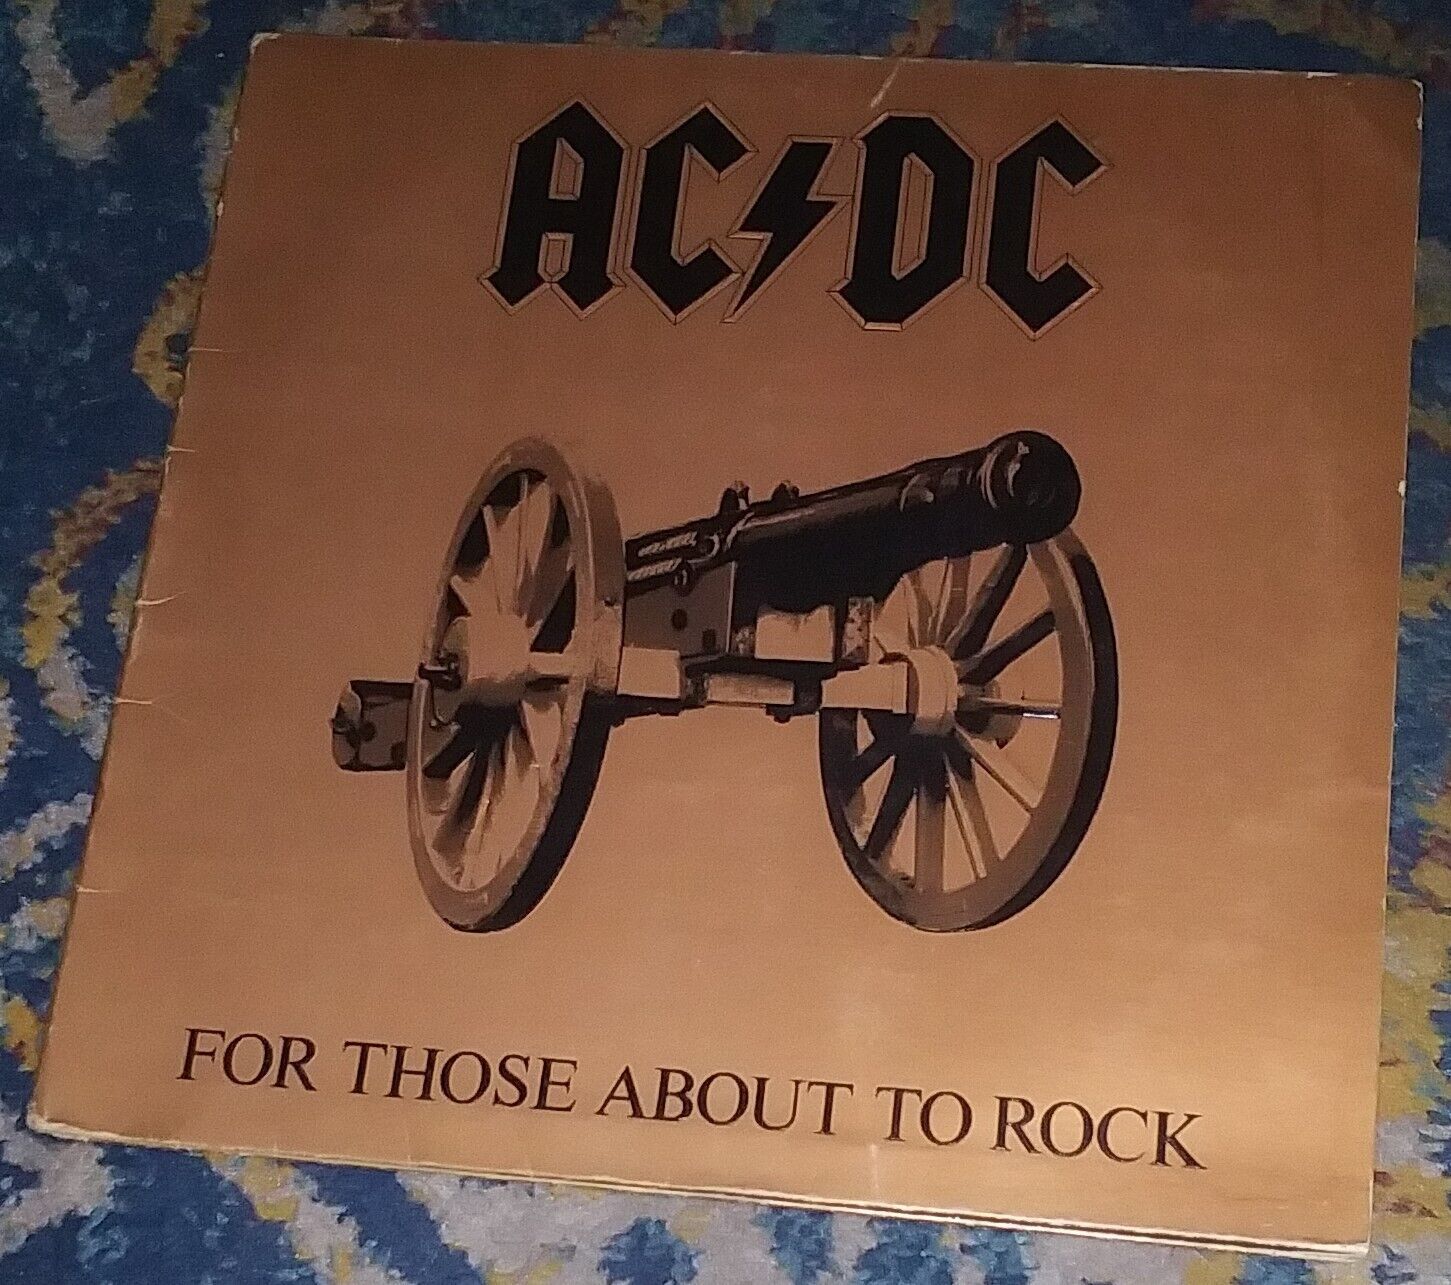 FOR THOSE ABOUT TO ROCK / AC/DC 1981 ATLANTIC LP SD 11111 Specialty Pressing